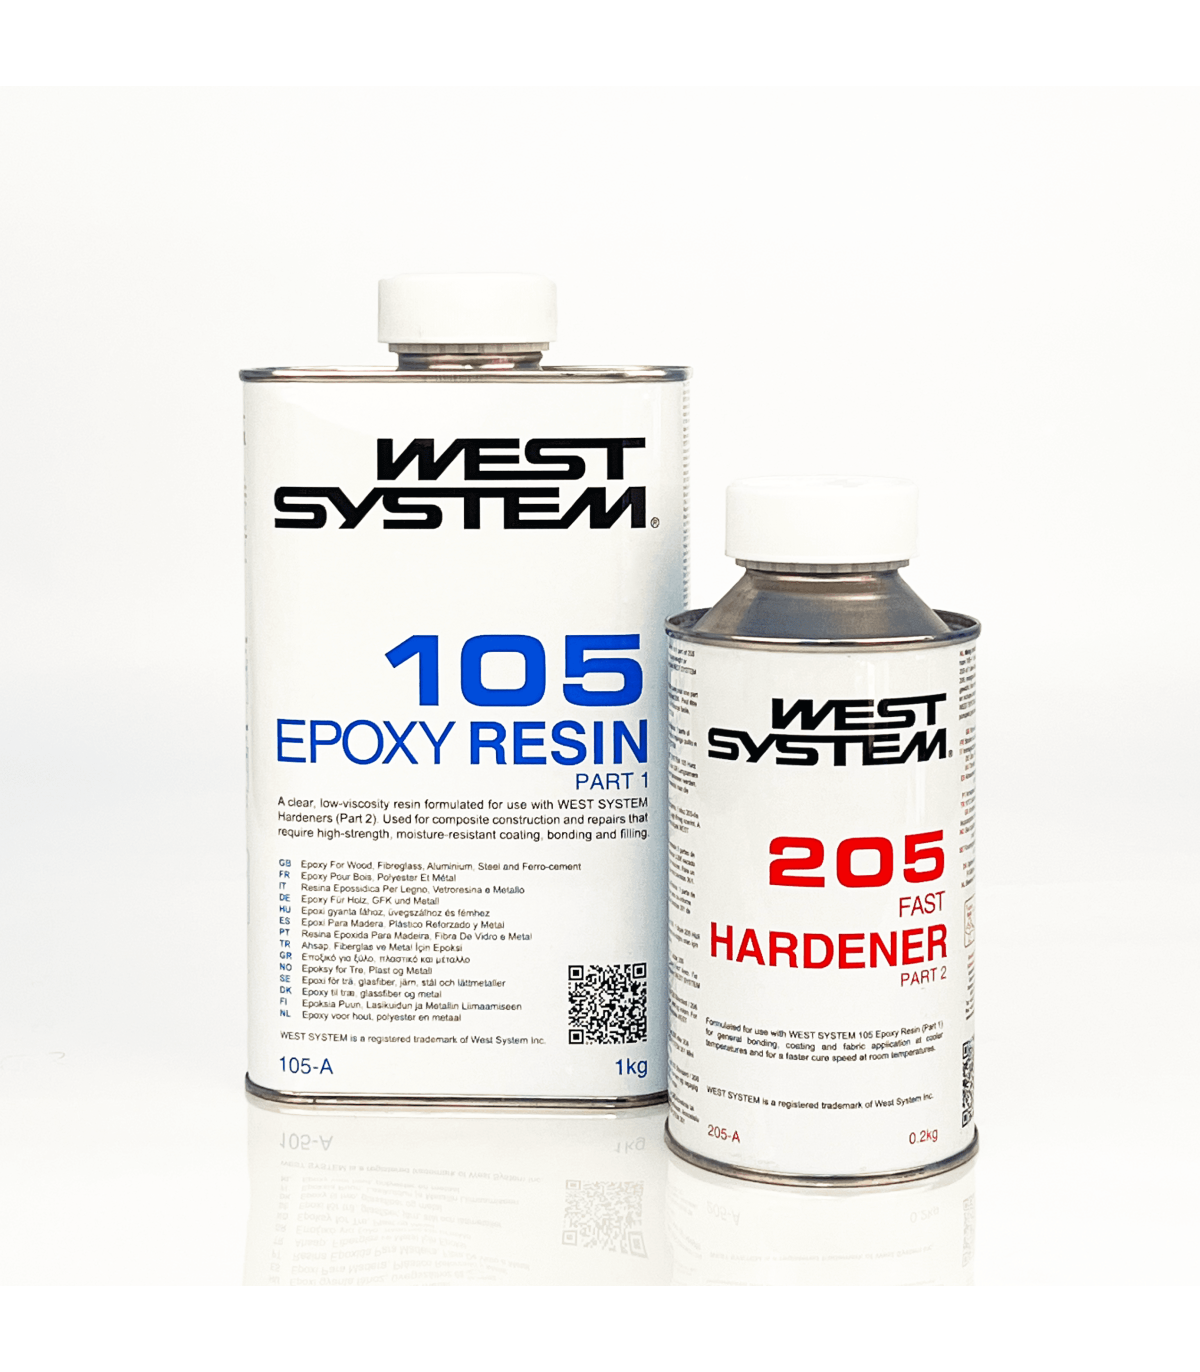 Kit 105/205A for fast curing epoxy. West System